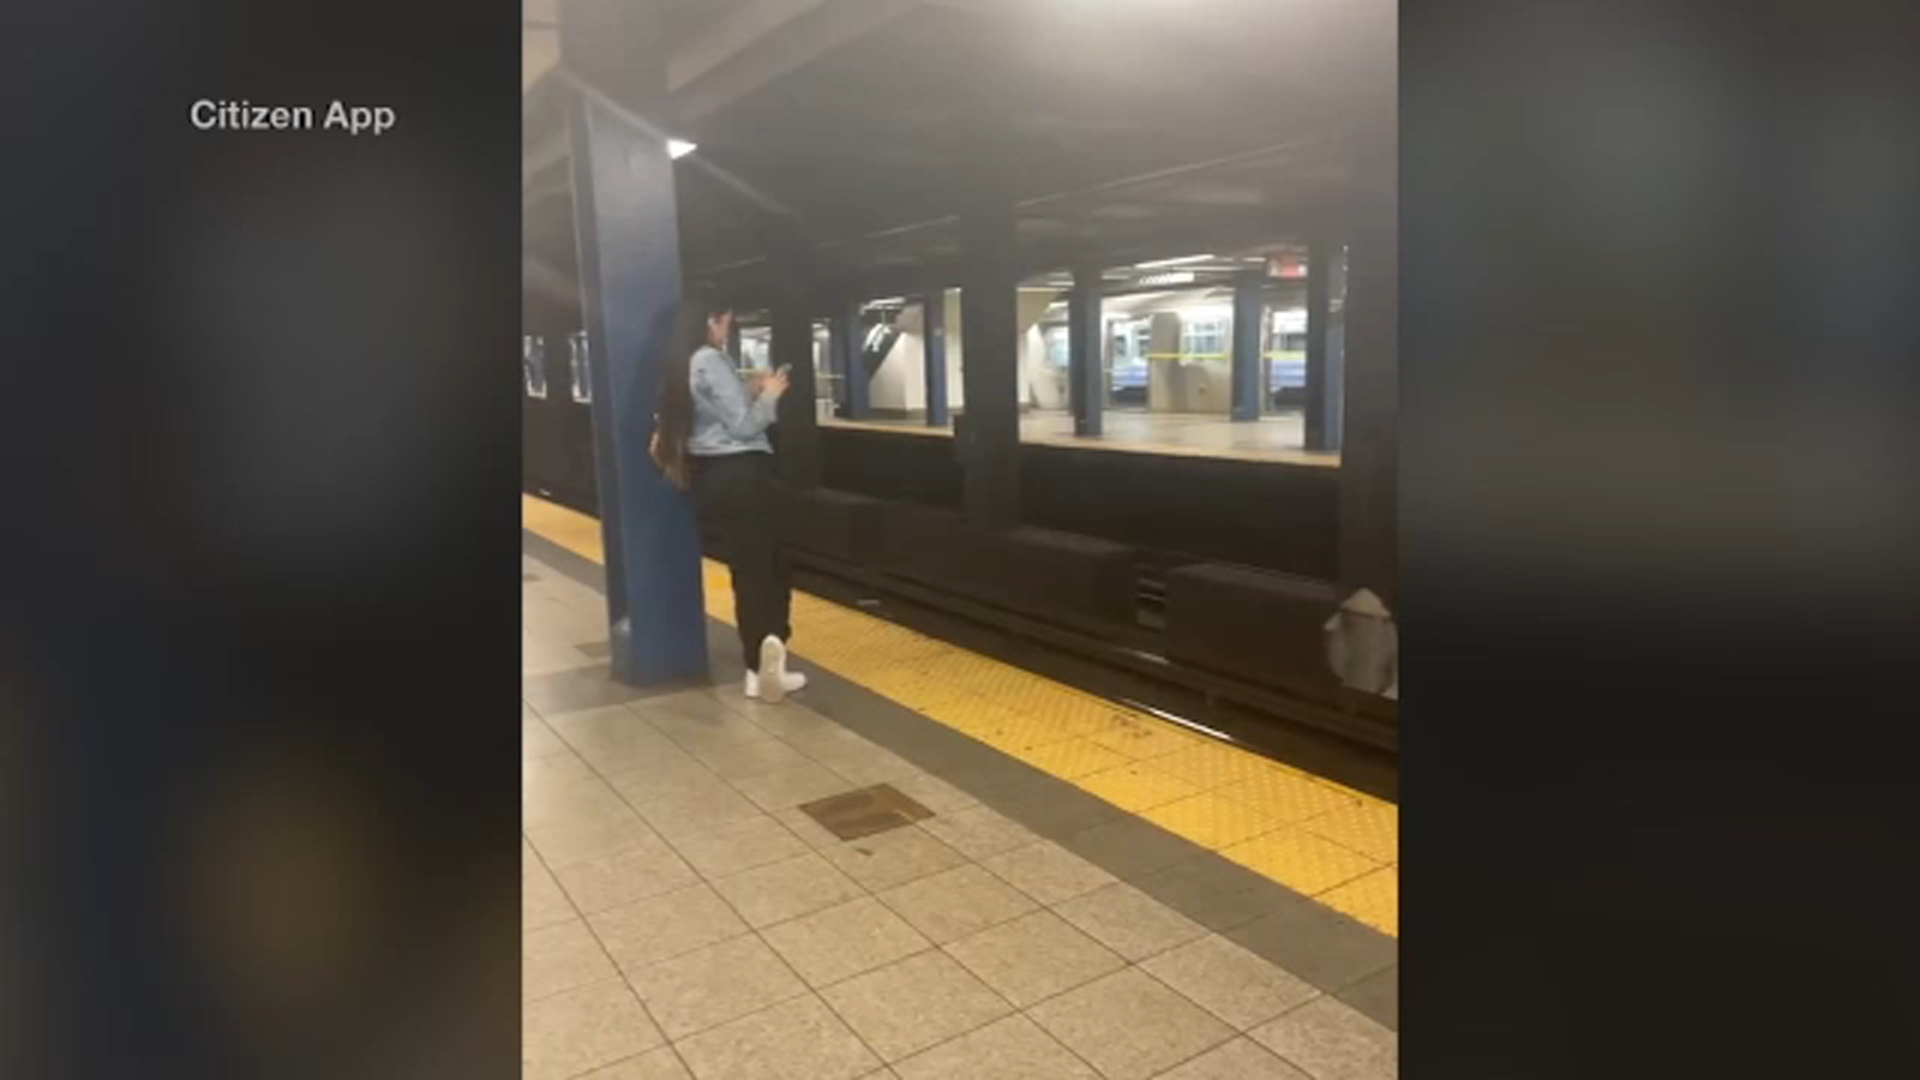 Man harassing NoHo subway riders dies after fellow passenger tries to subdue him